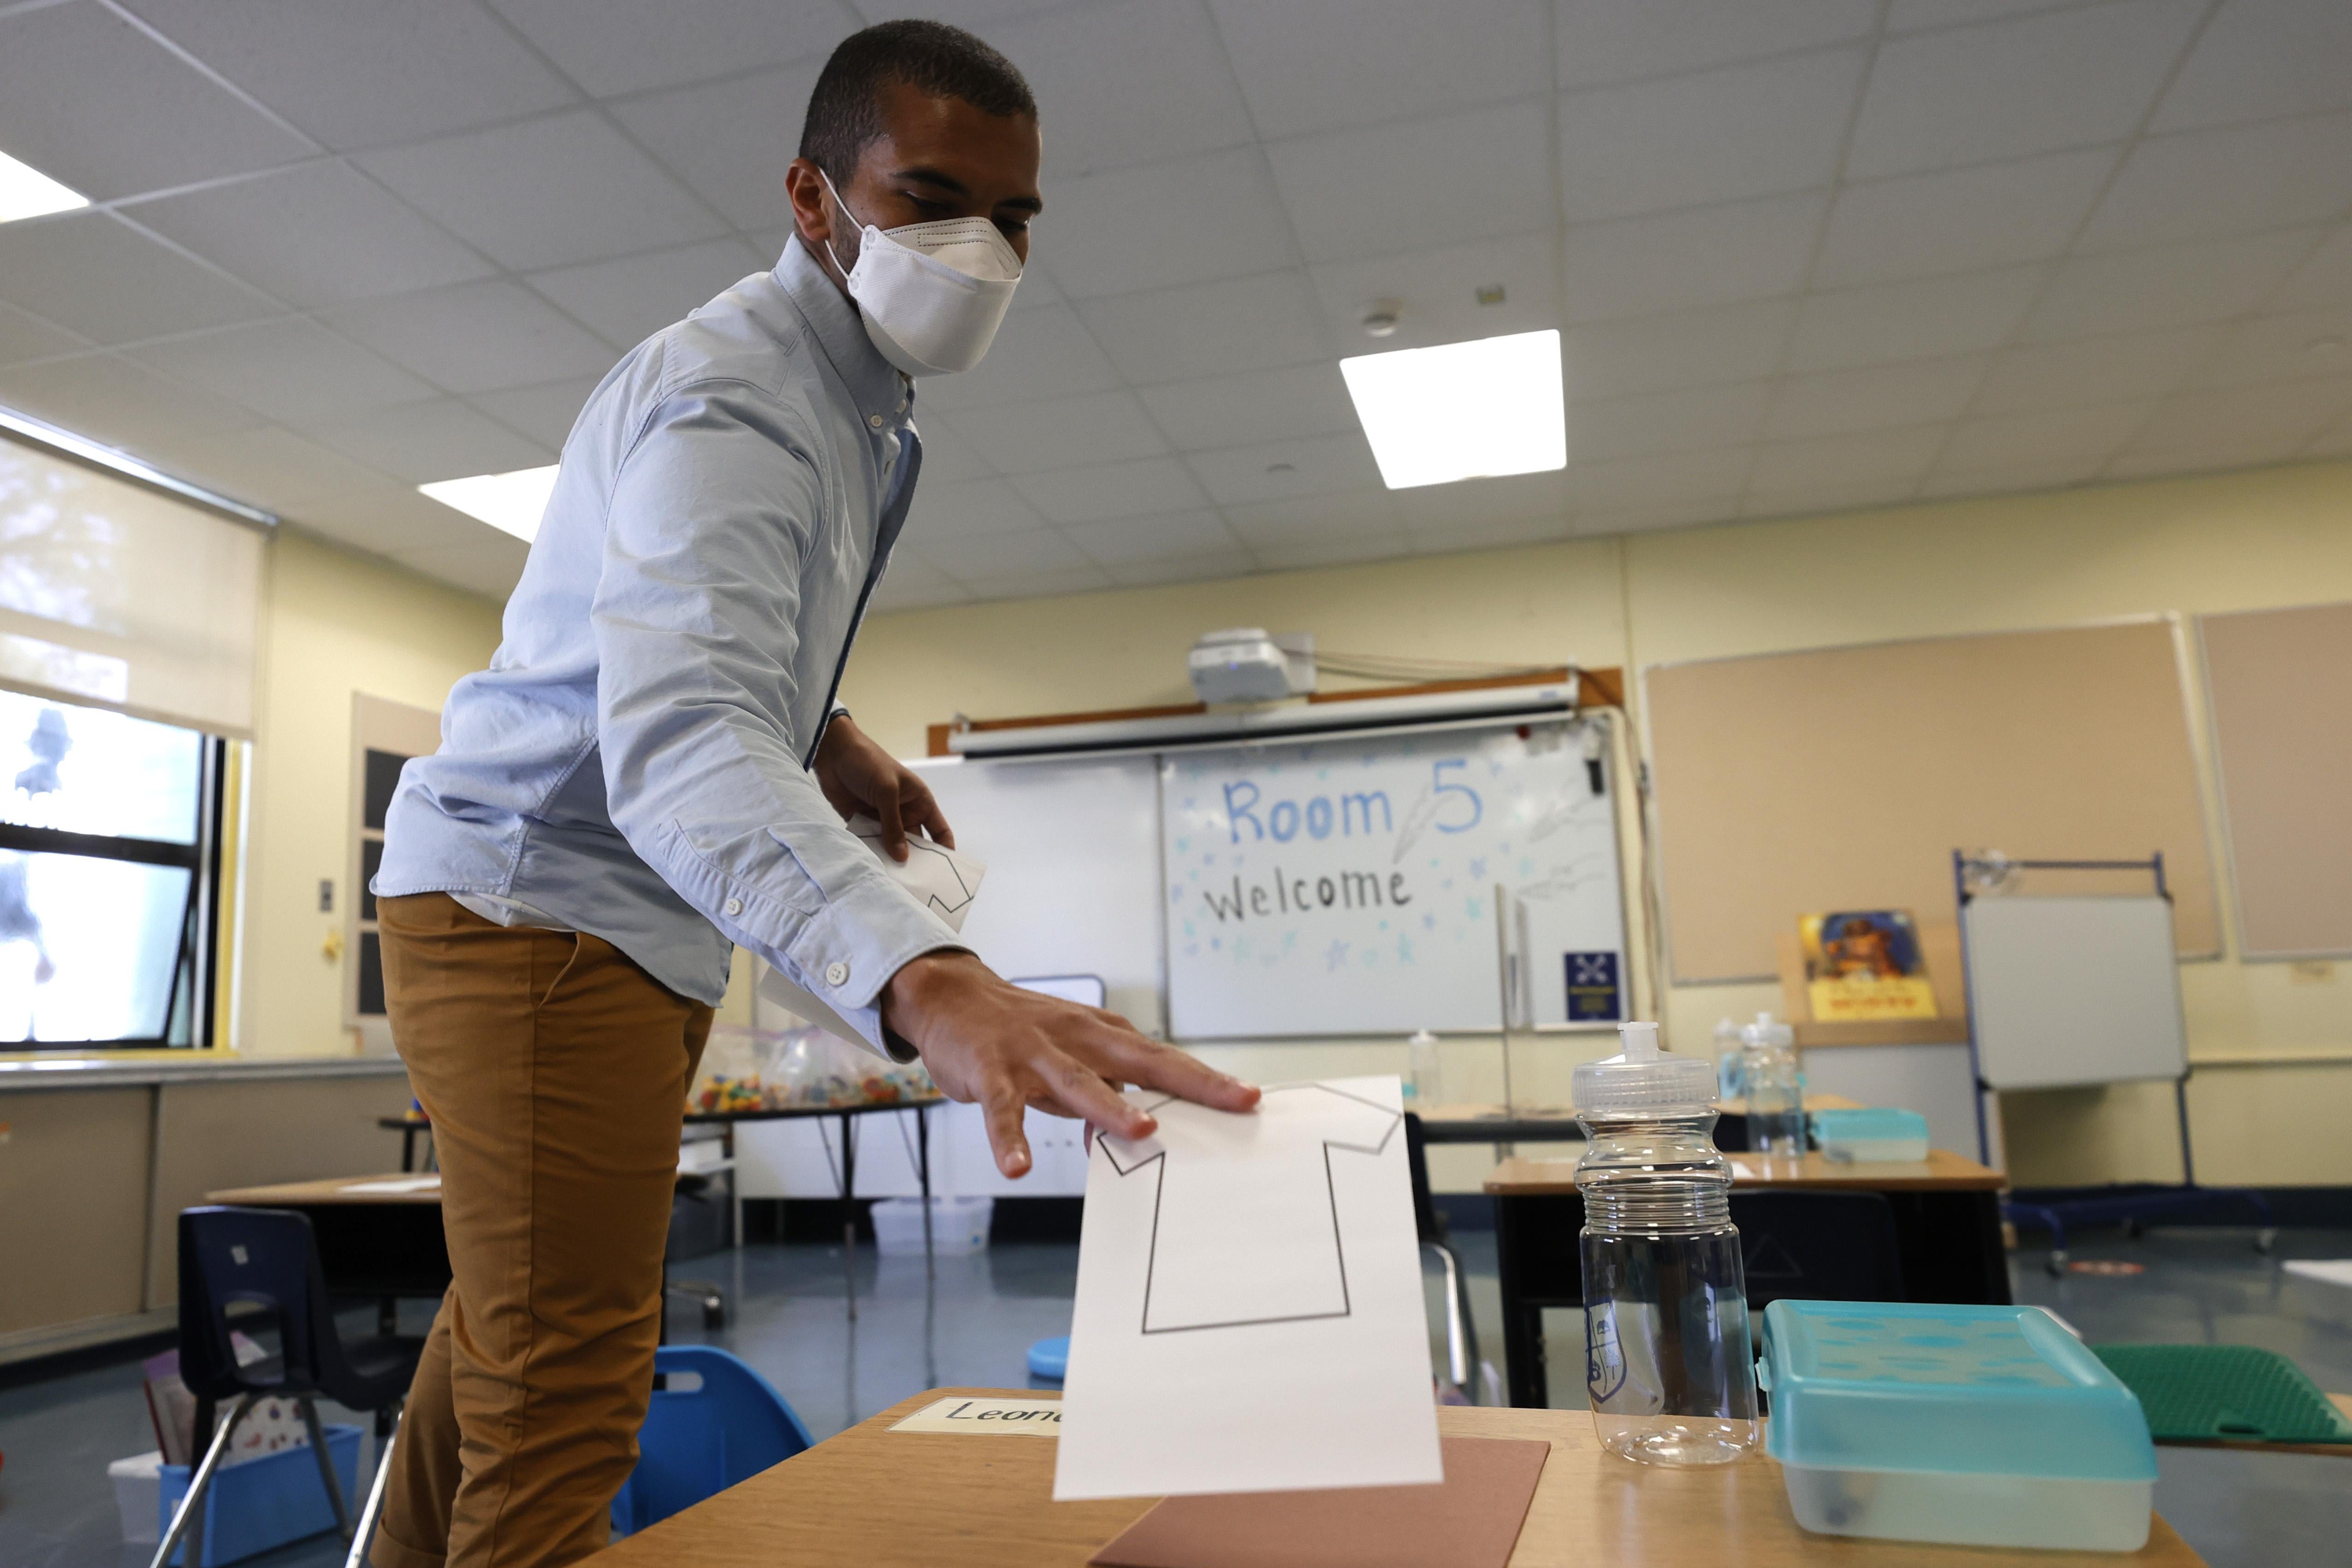 A Black man in a facemask puts a piece of paper on a desk in a classroom.